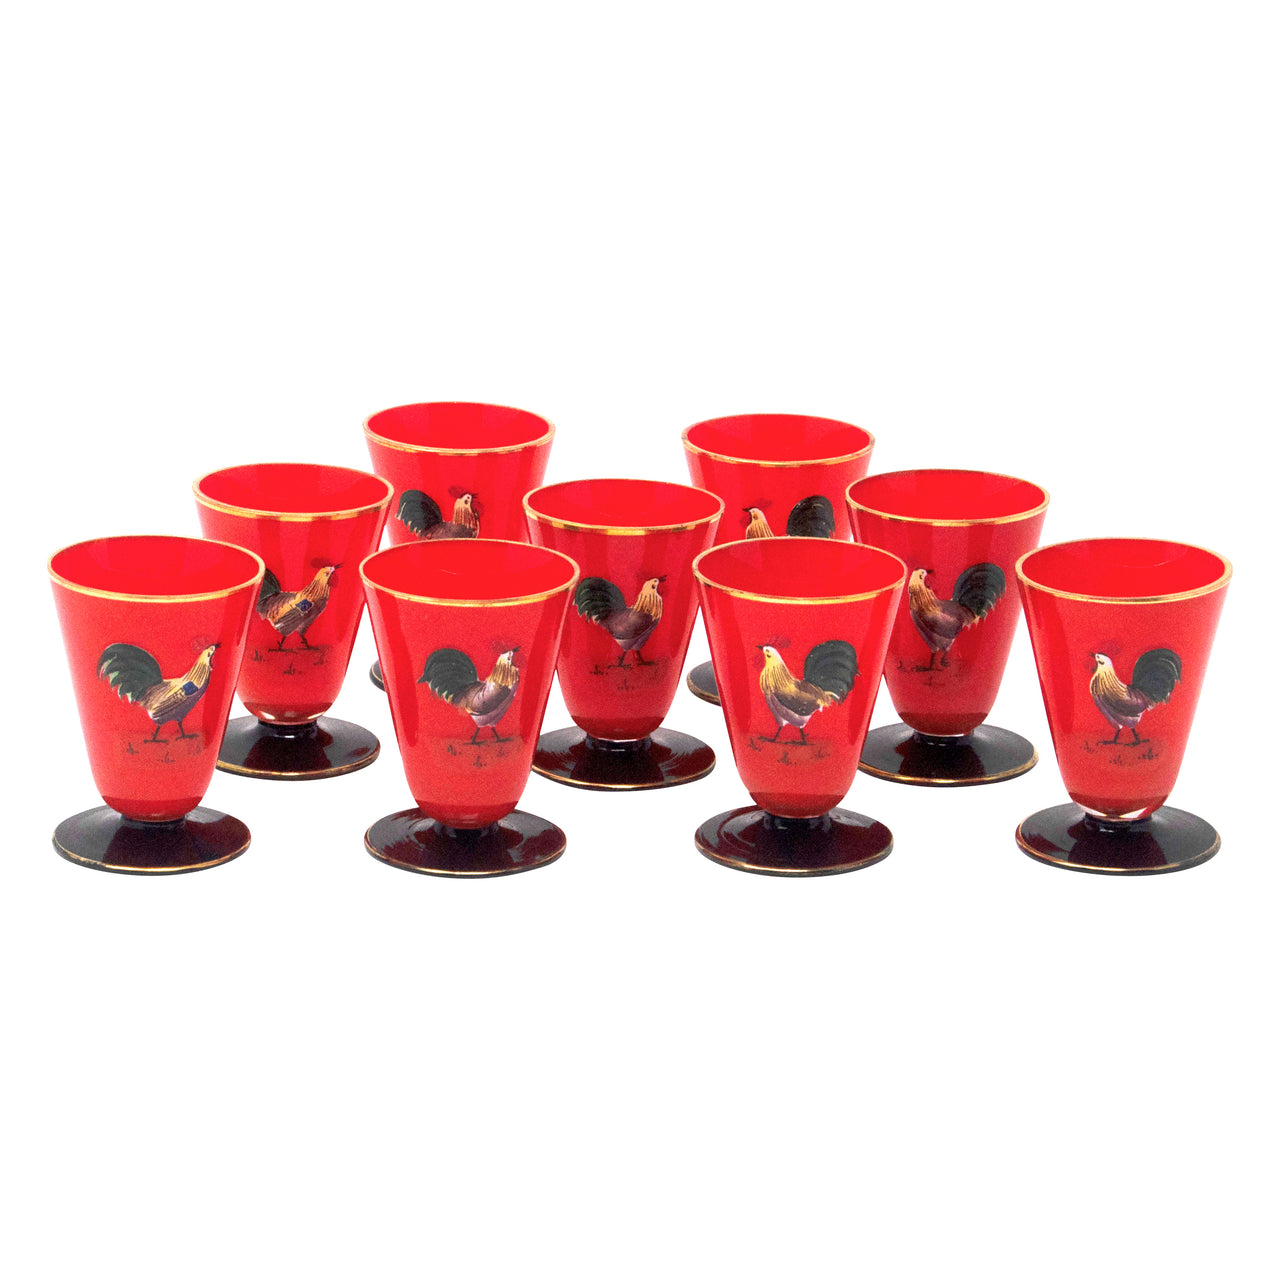 Vintage Prohibition Era Red & Black Hand Painted Roosters Cocktail Glasses | The Hour Shop